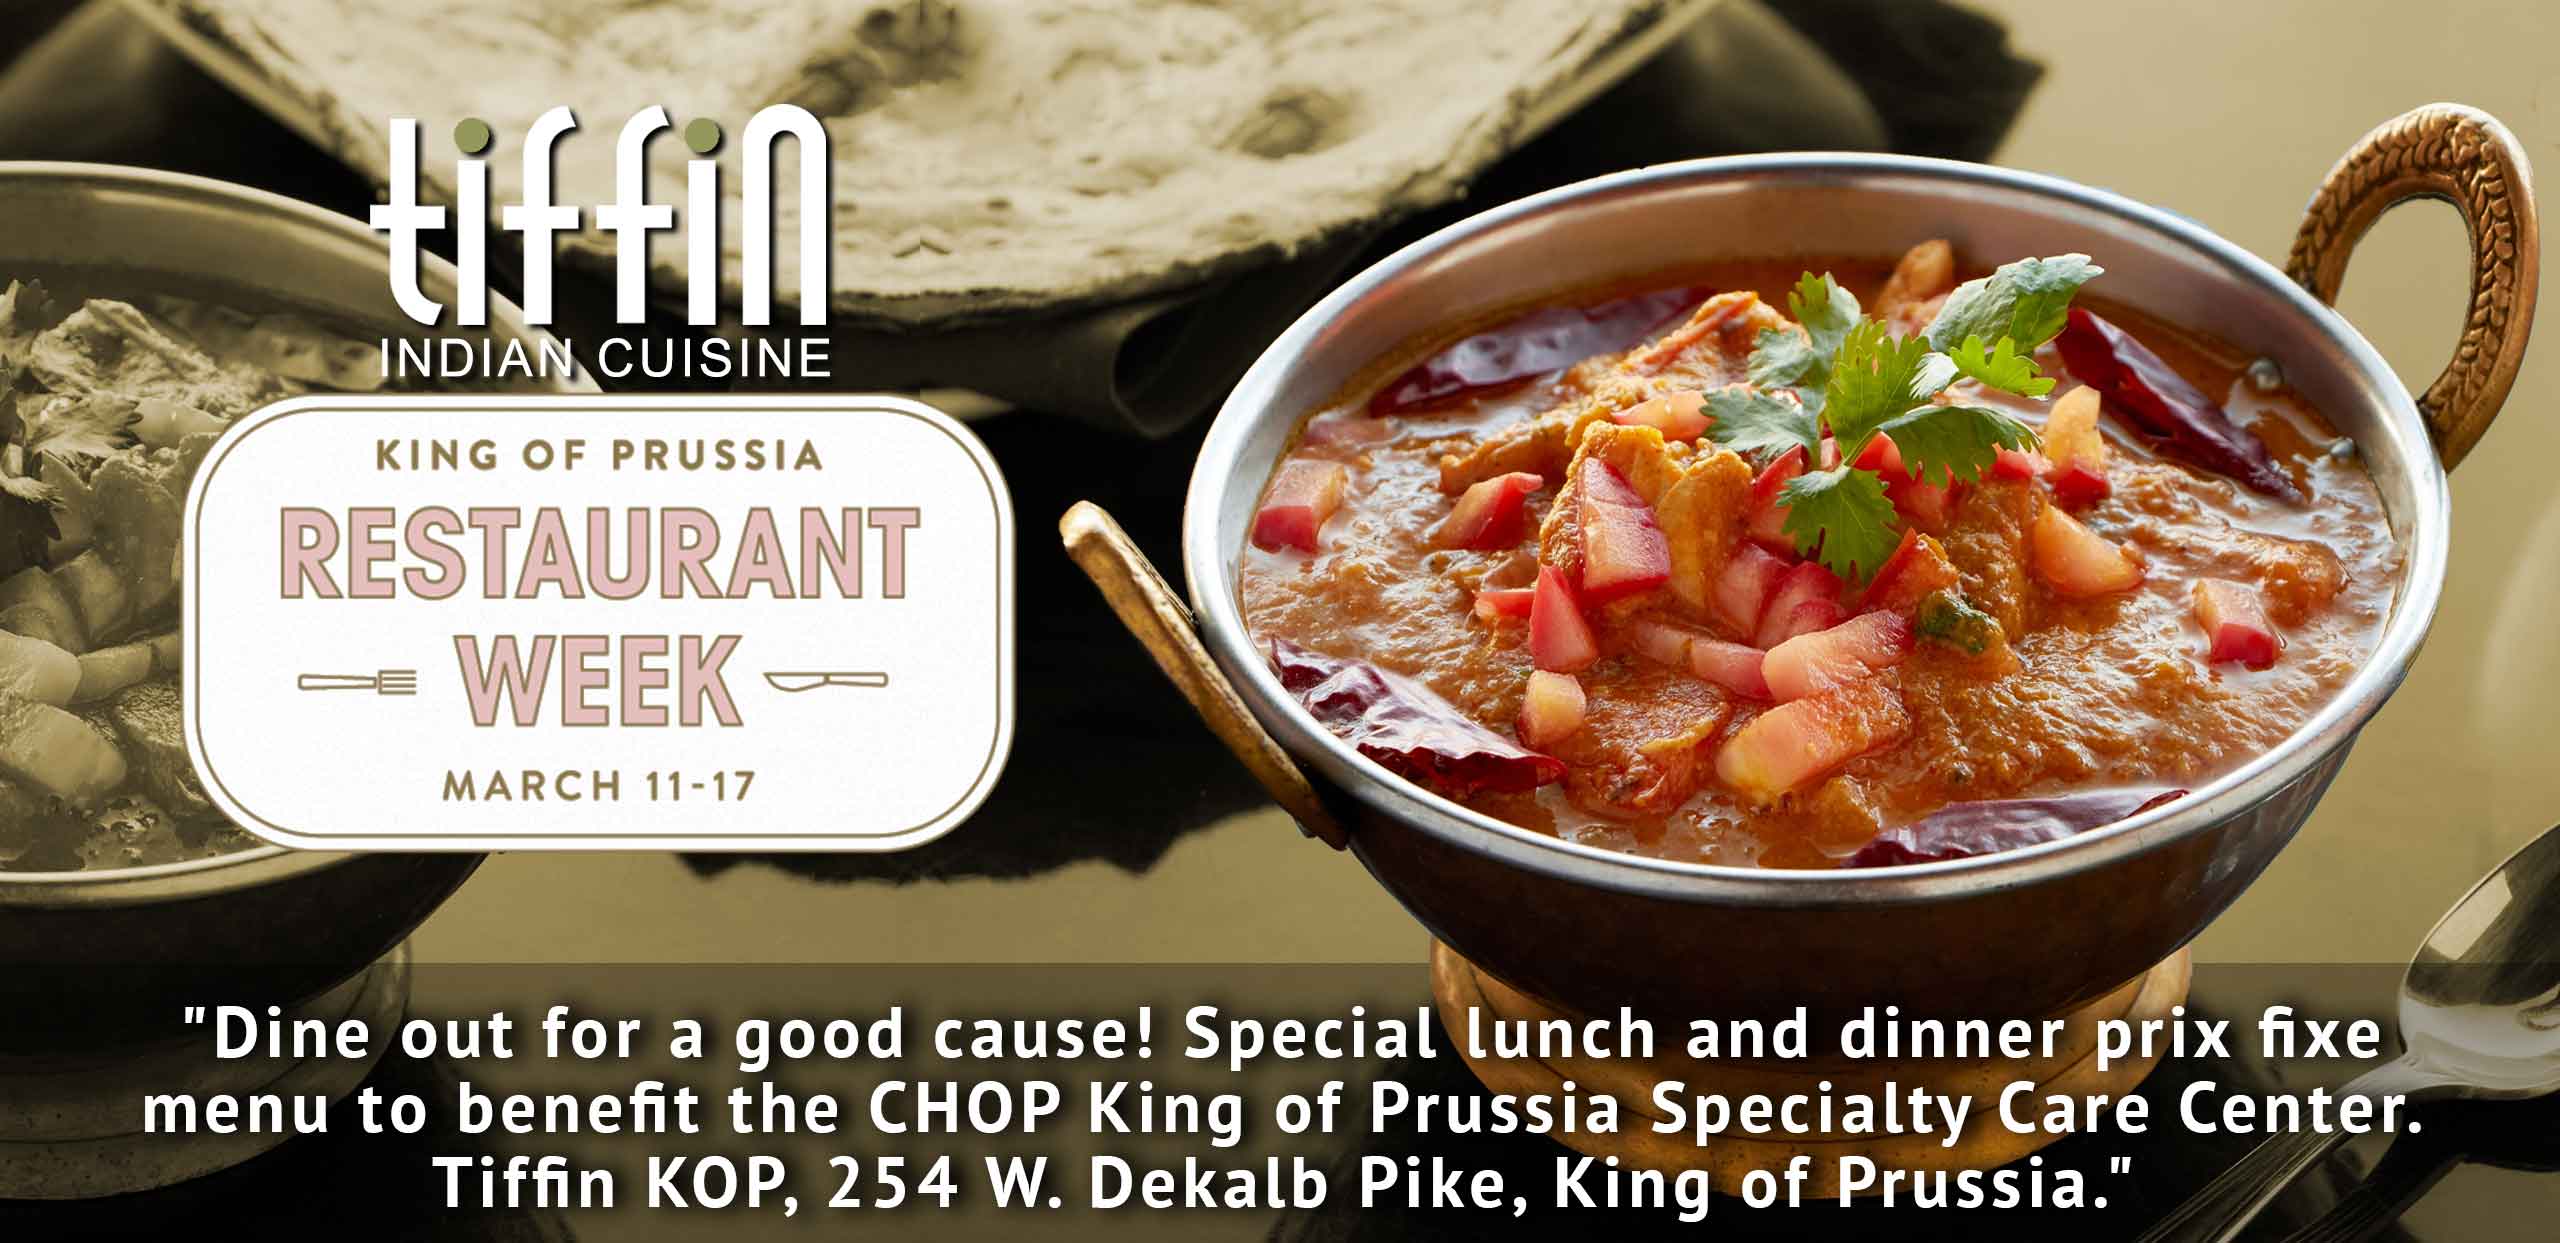 Dine out for a good cause! Special lunch and dinner prix fixe menu to benefit the CHOP King of Prussia Specialty Care Center. Tiffin KOP, 254 W. Dekalb Pike, King of Prussia. For more details about the fun